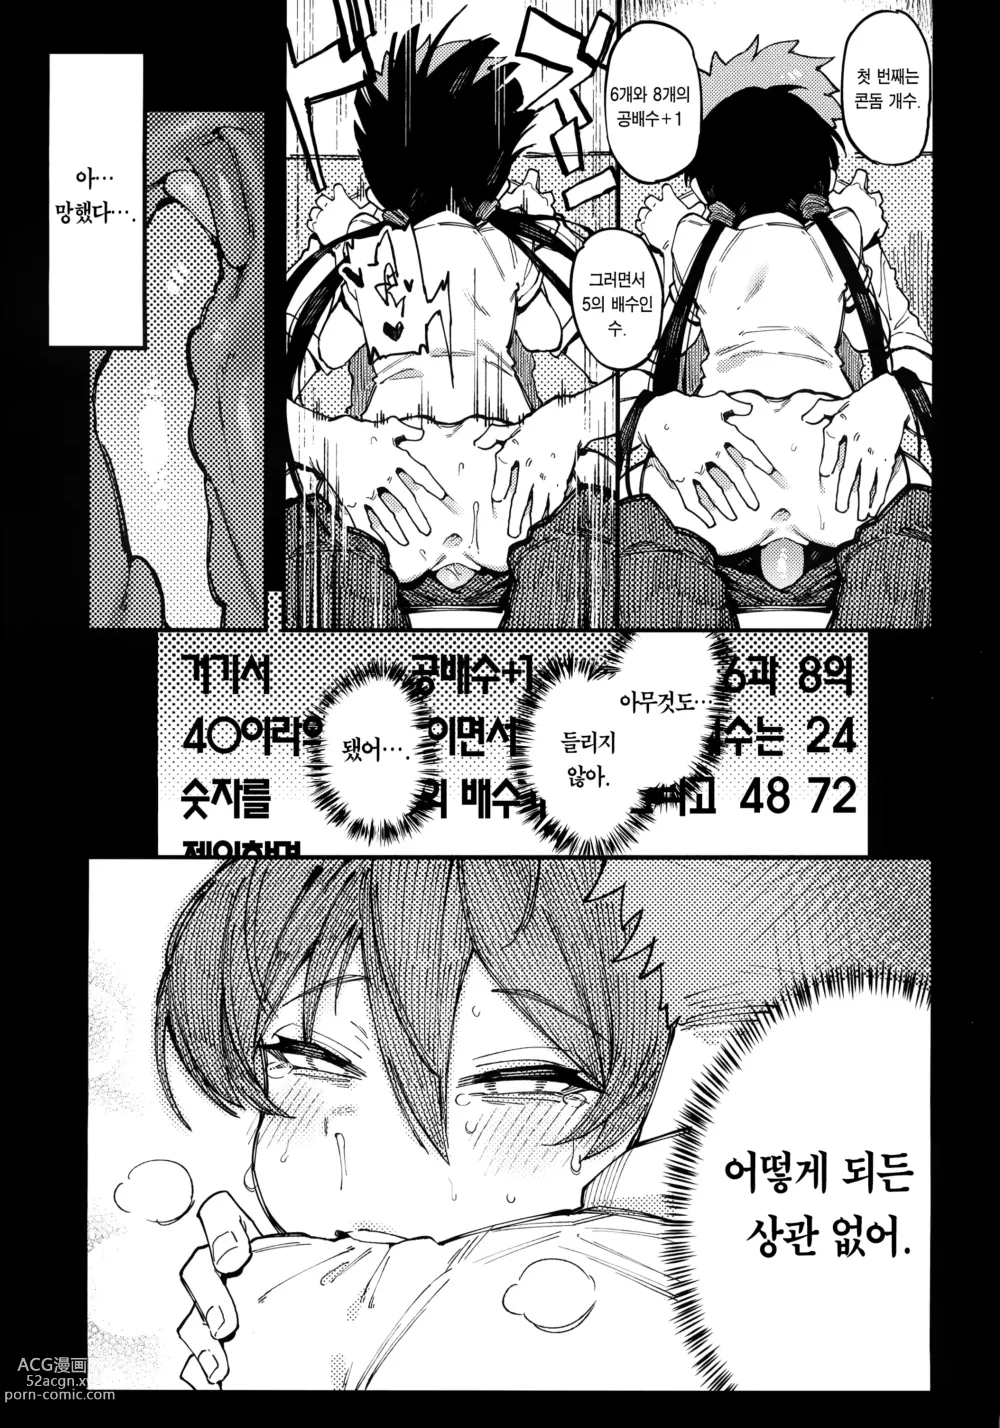 Page 21 of doujinshi 수학 1 상 (decensored)